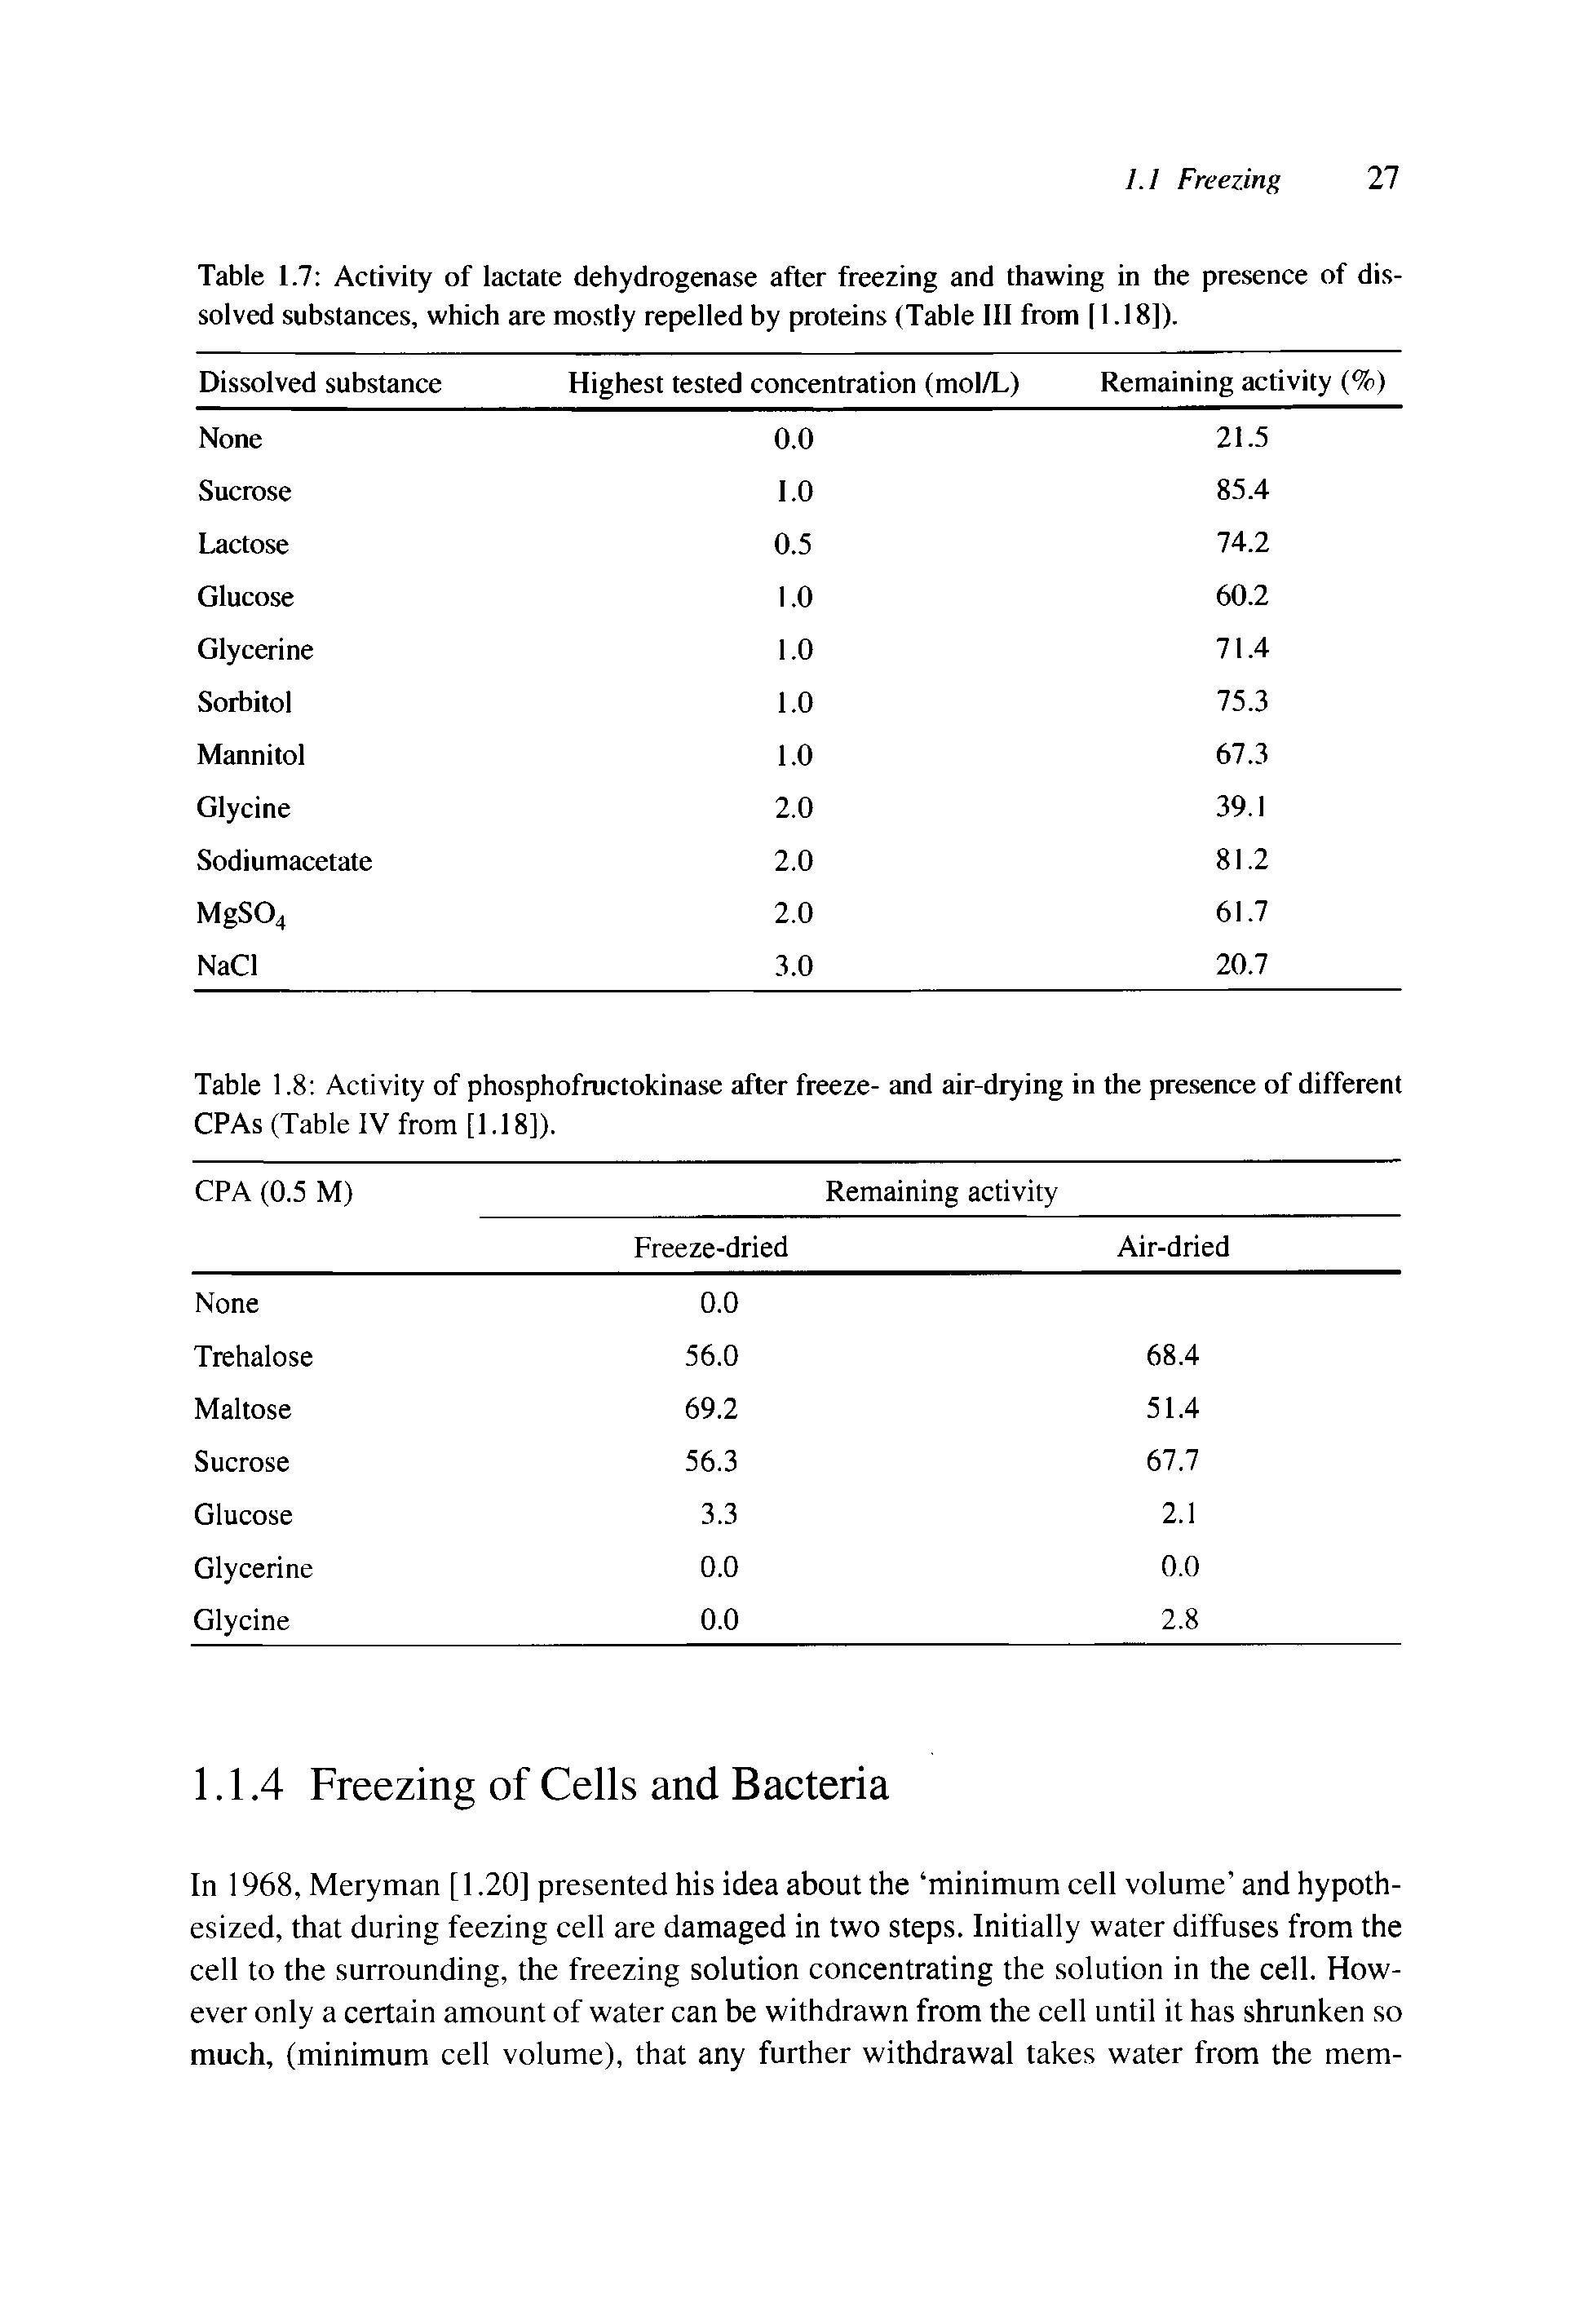 Table 1.7 Activity of lactate dehydrogenase after freezing and thawing in the presence of dissolved substances, which are mostly repelled by proteins (Table III from [1.18]).